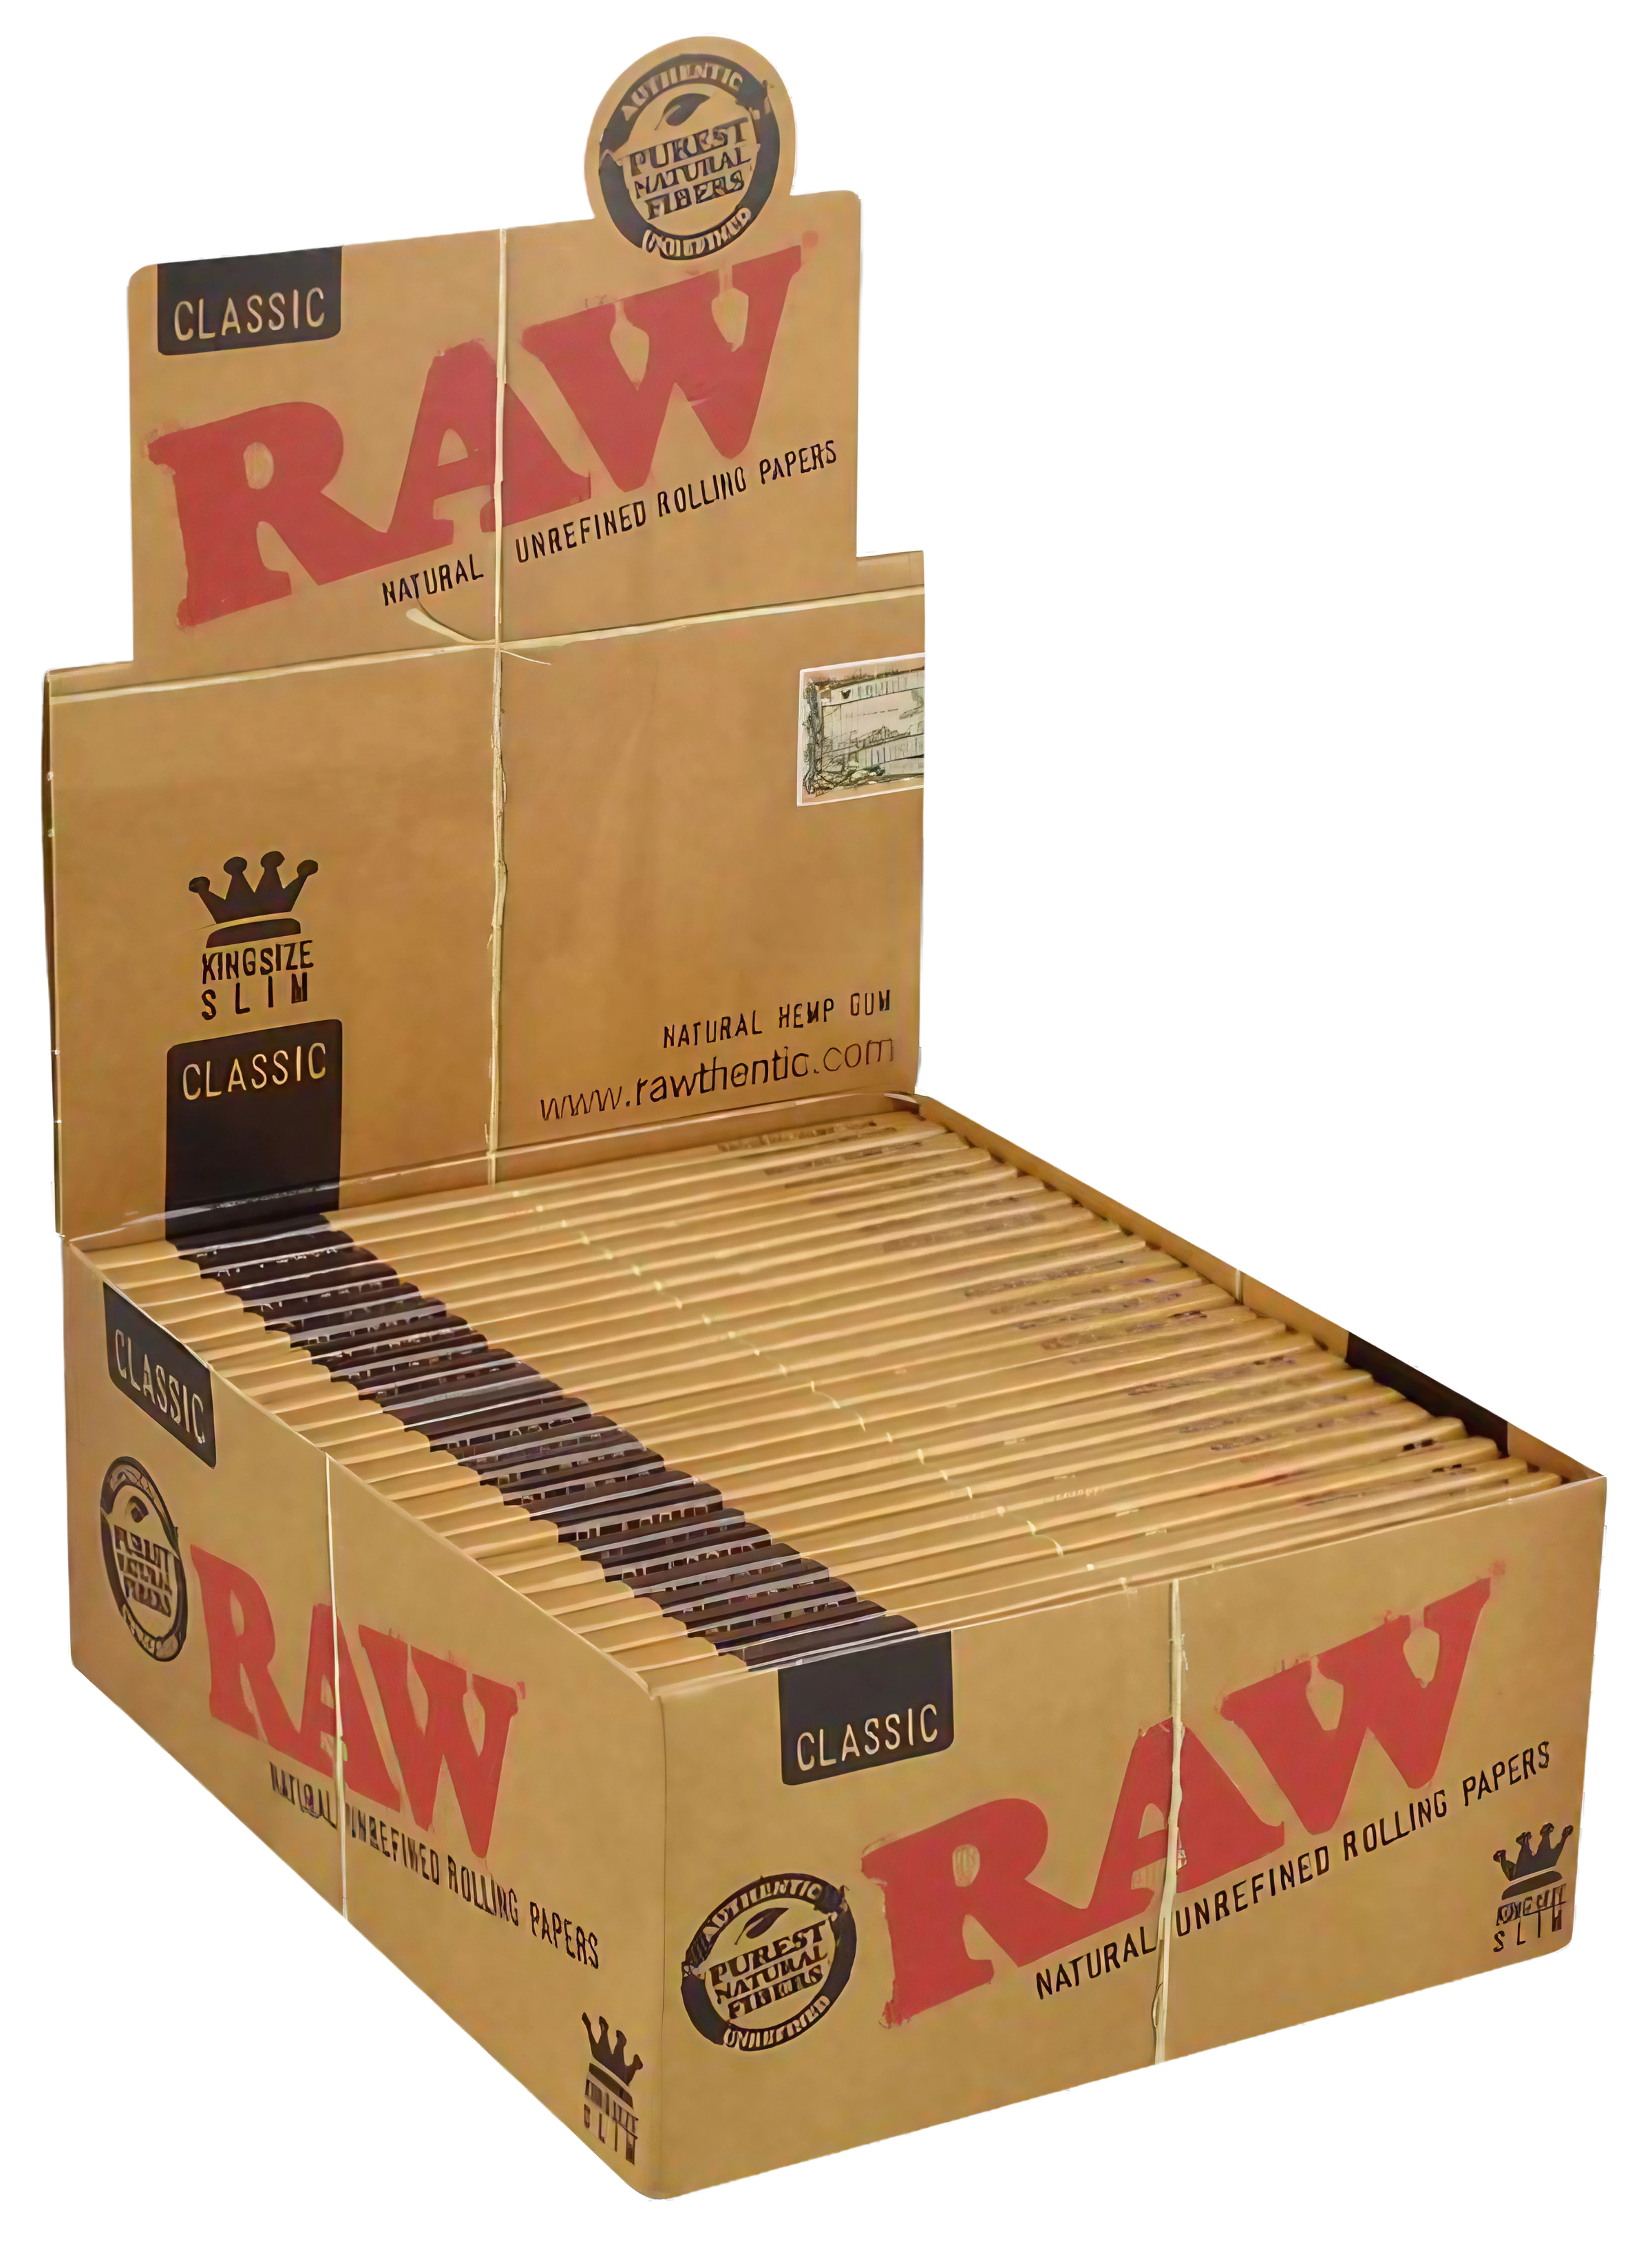 PAW Slow Lick Pad – The Raw Connoisseurs